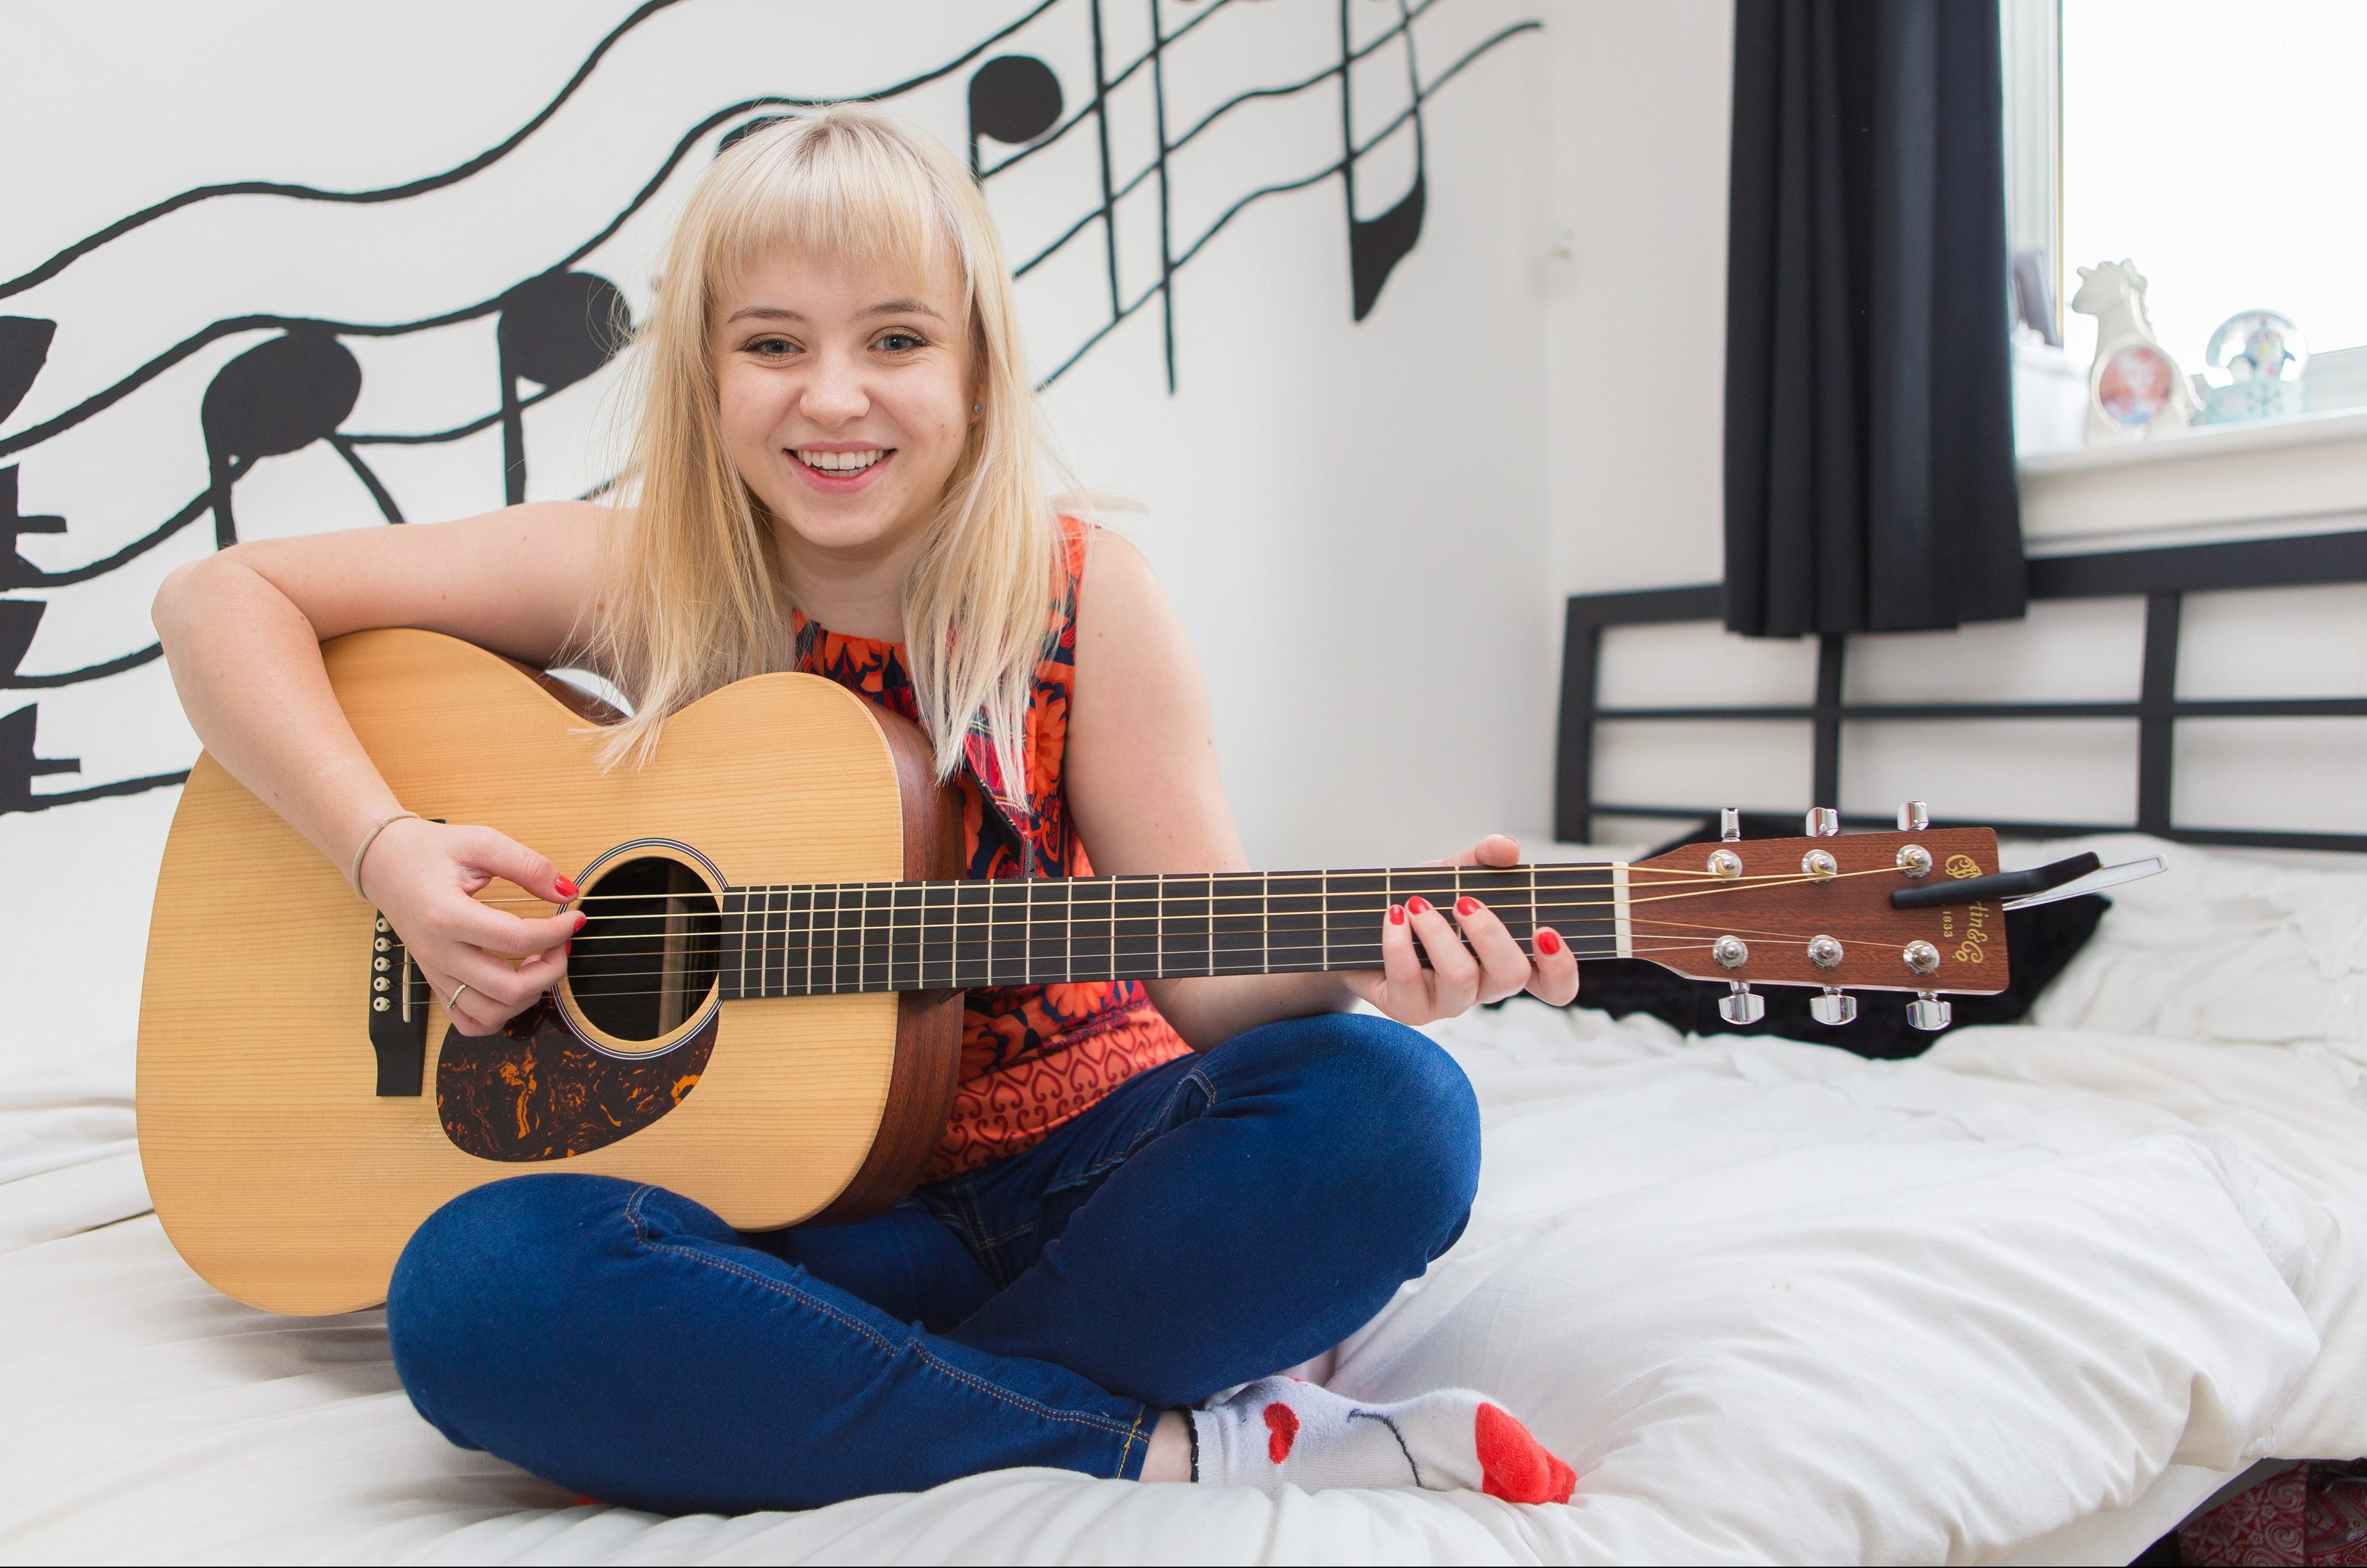 18-year-old singer/songwriter Deni Smith is preparing to launch her new single on iTunes on August 15, but that is after her stage appearance at Belladrum Festival.